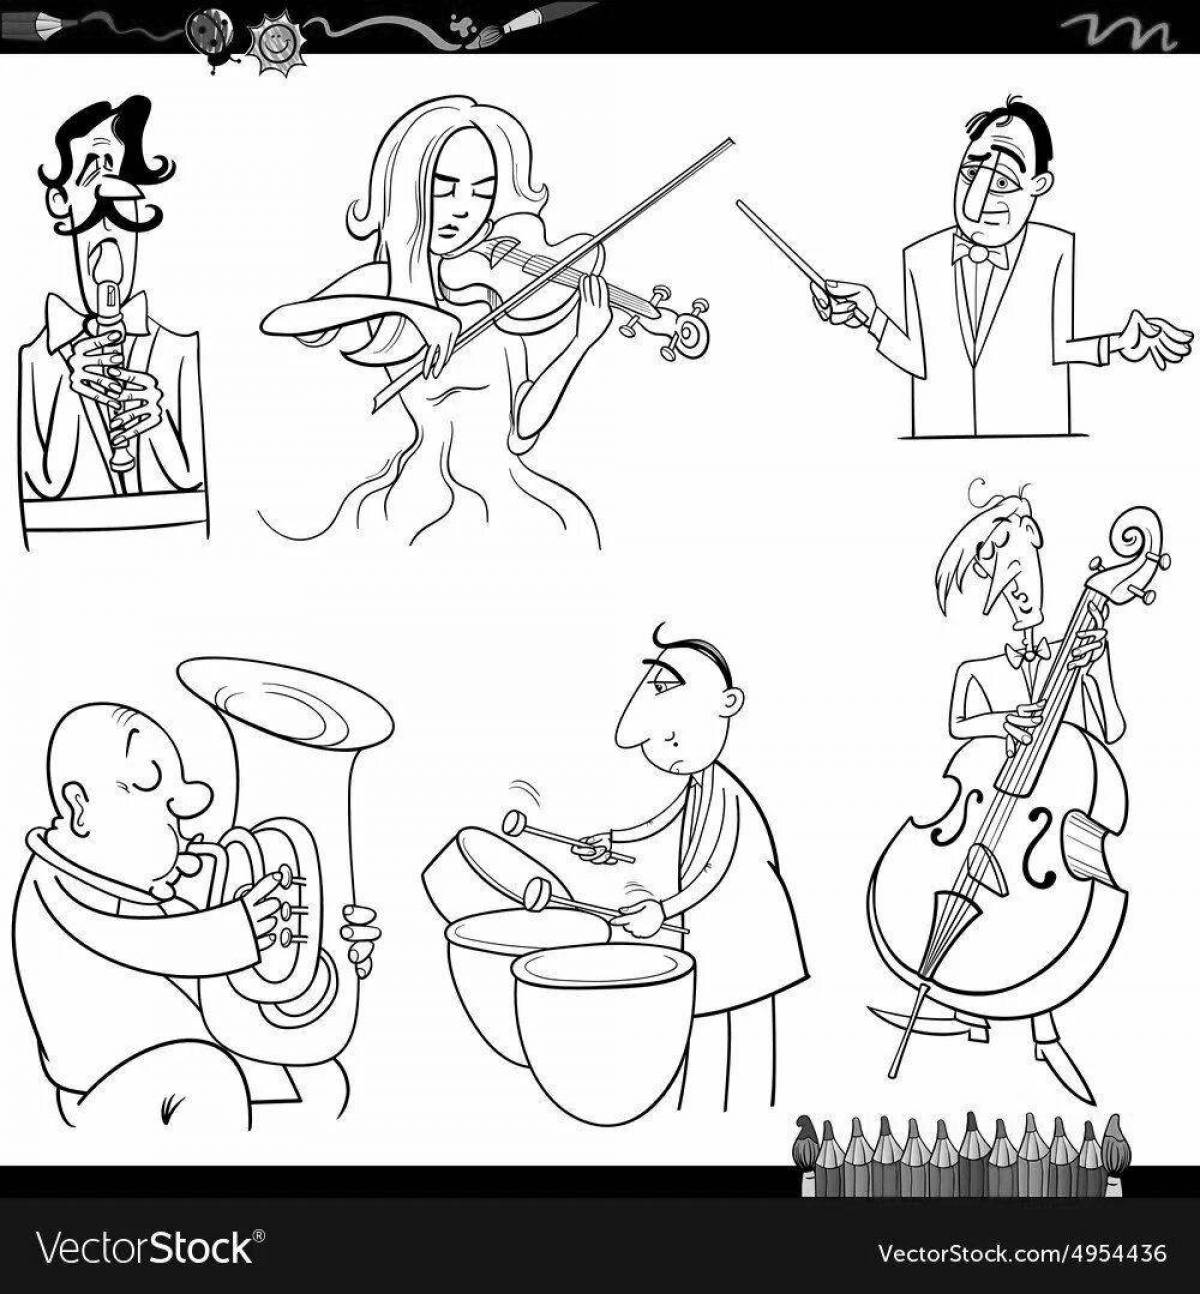 Amazing orchestra coloring for kids